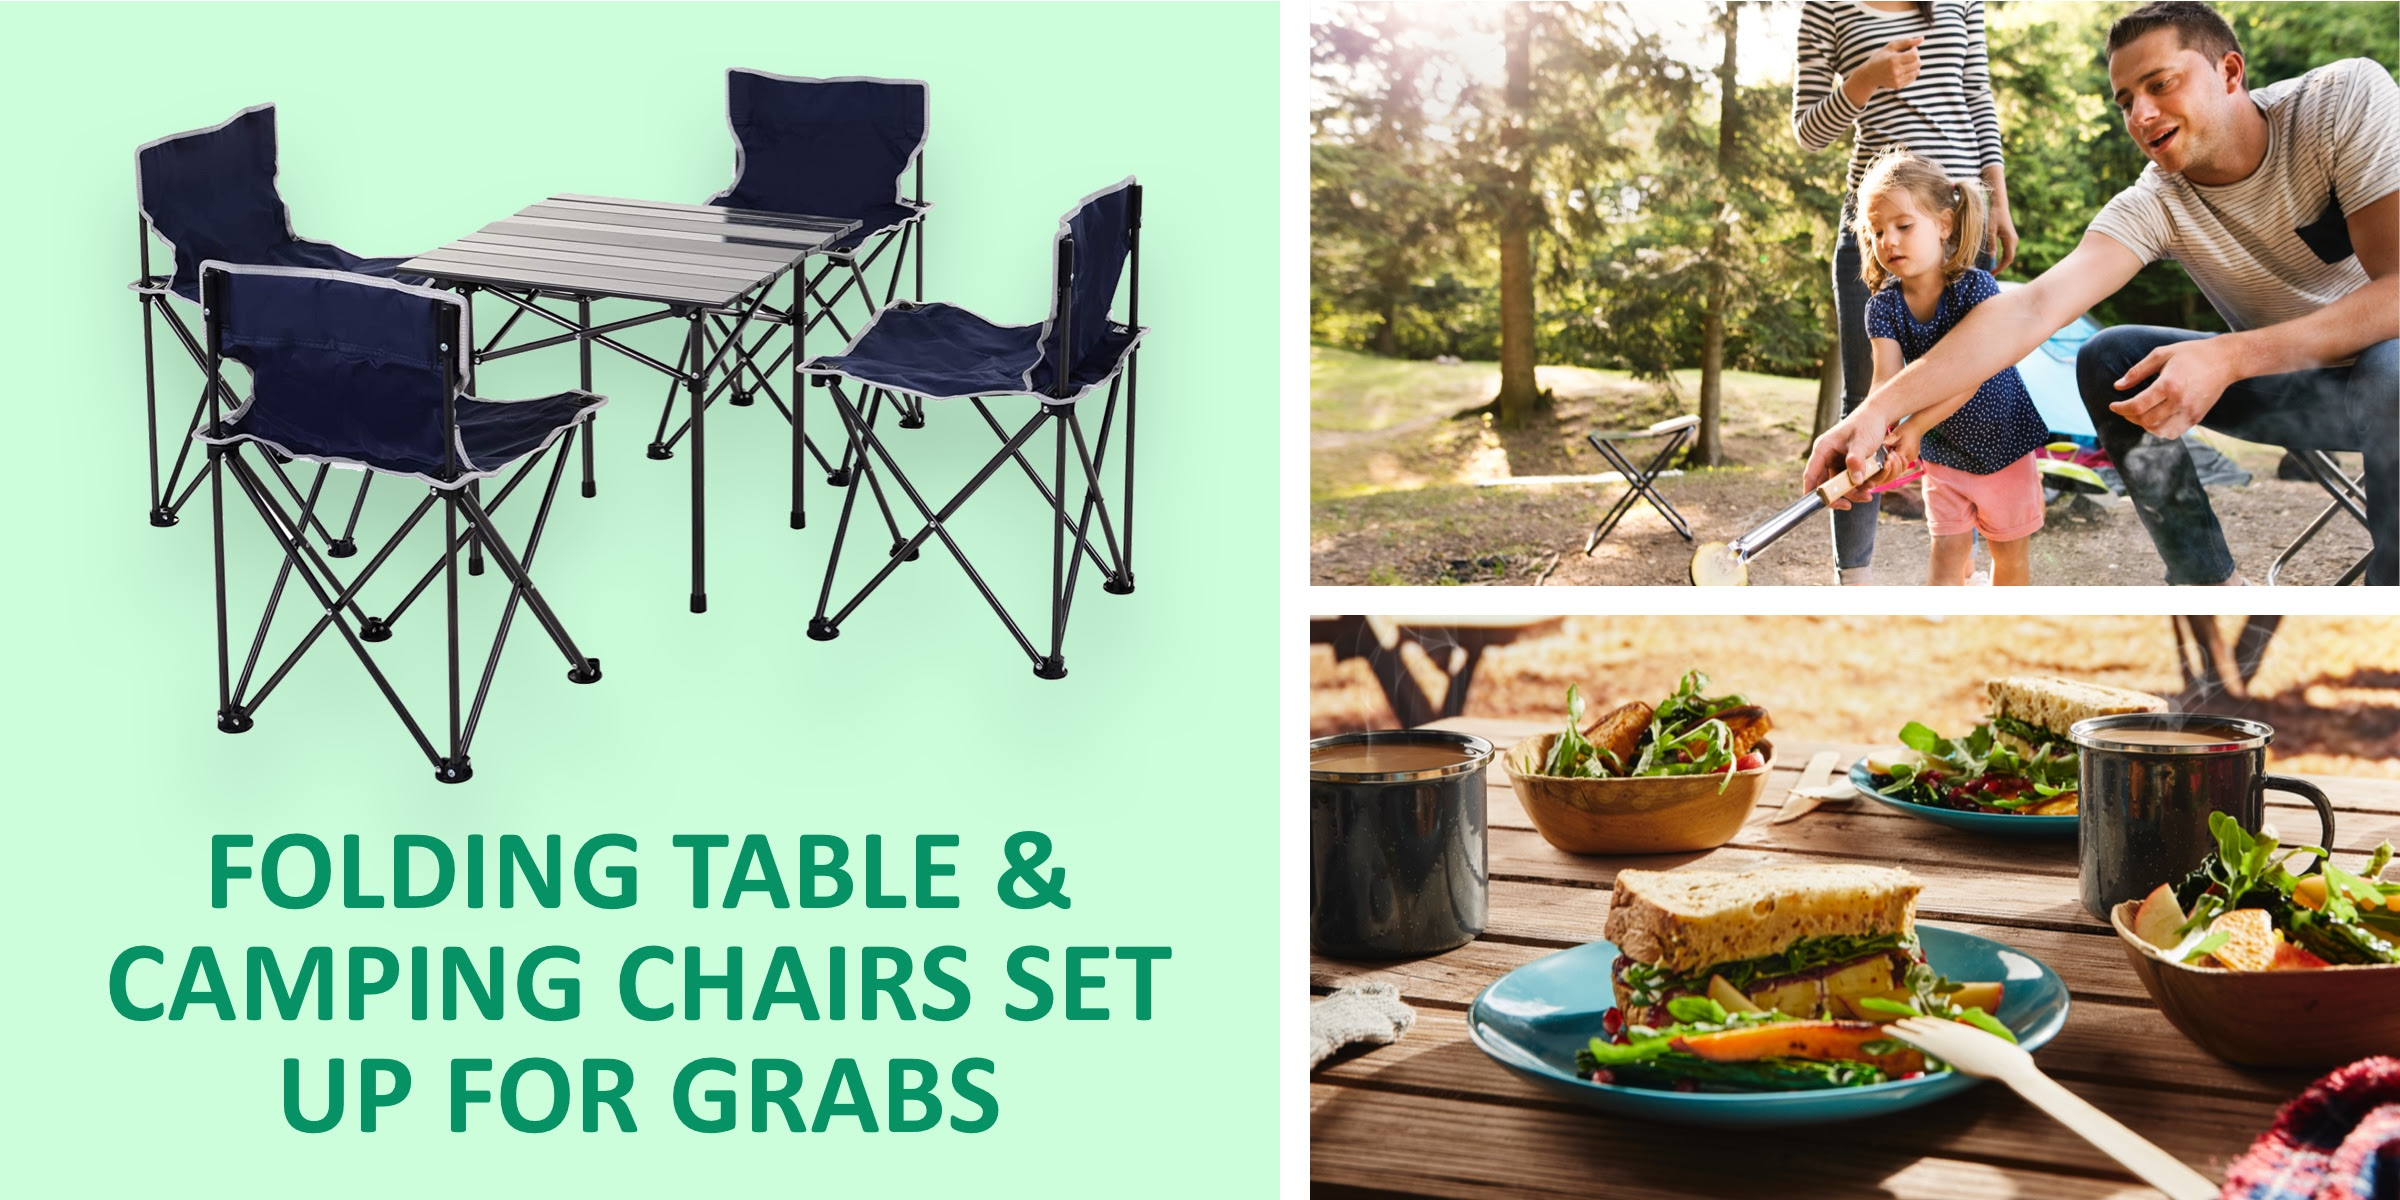 folding camping table and chair sets up for grabs with JUST MILK